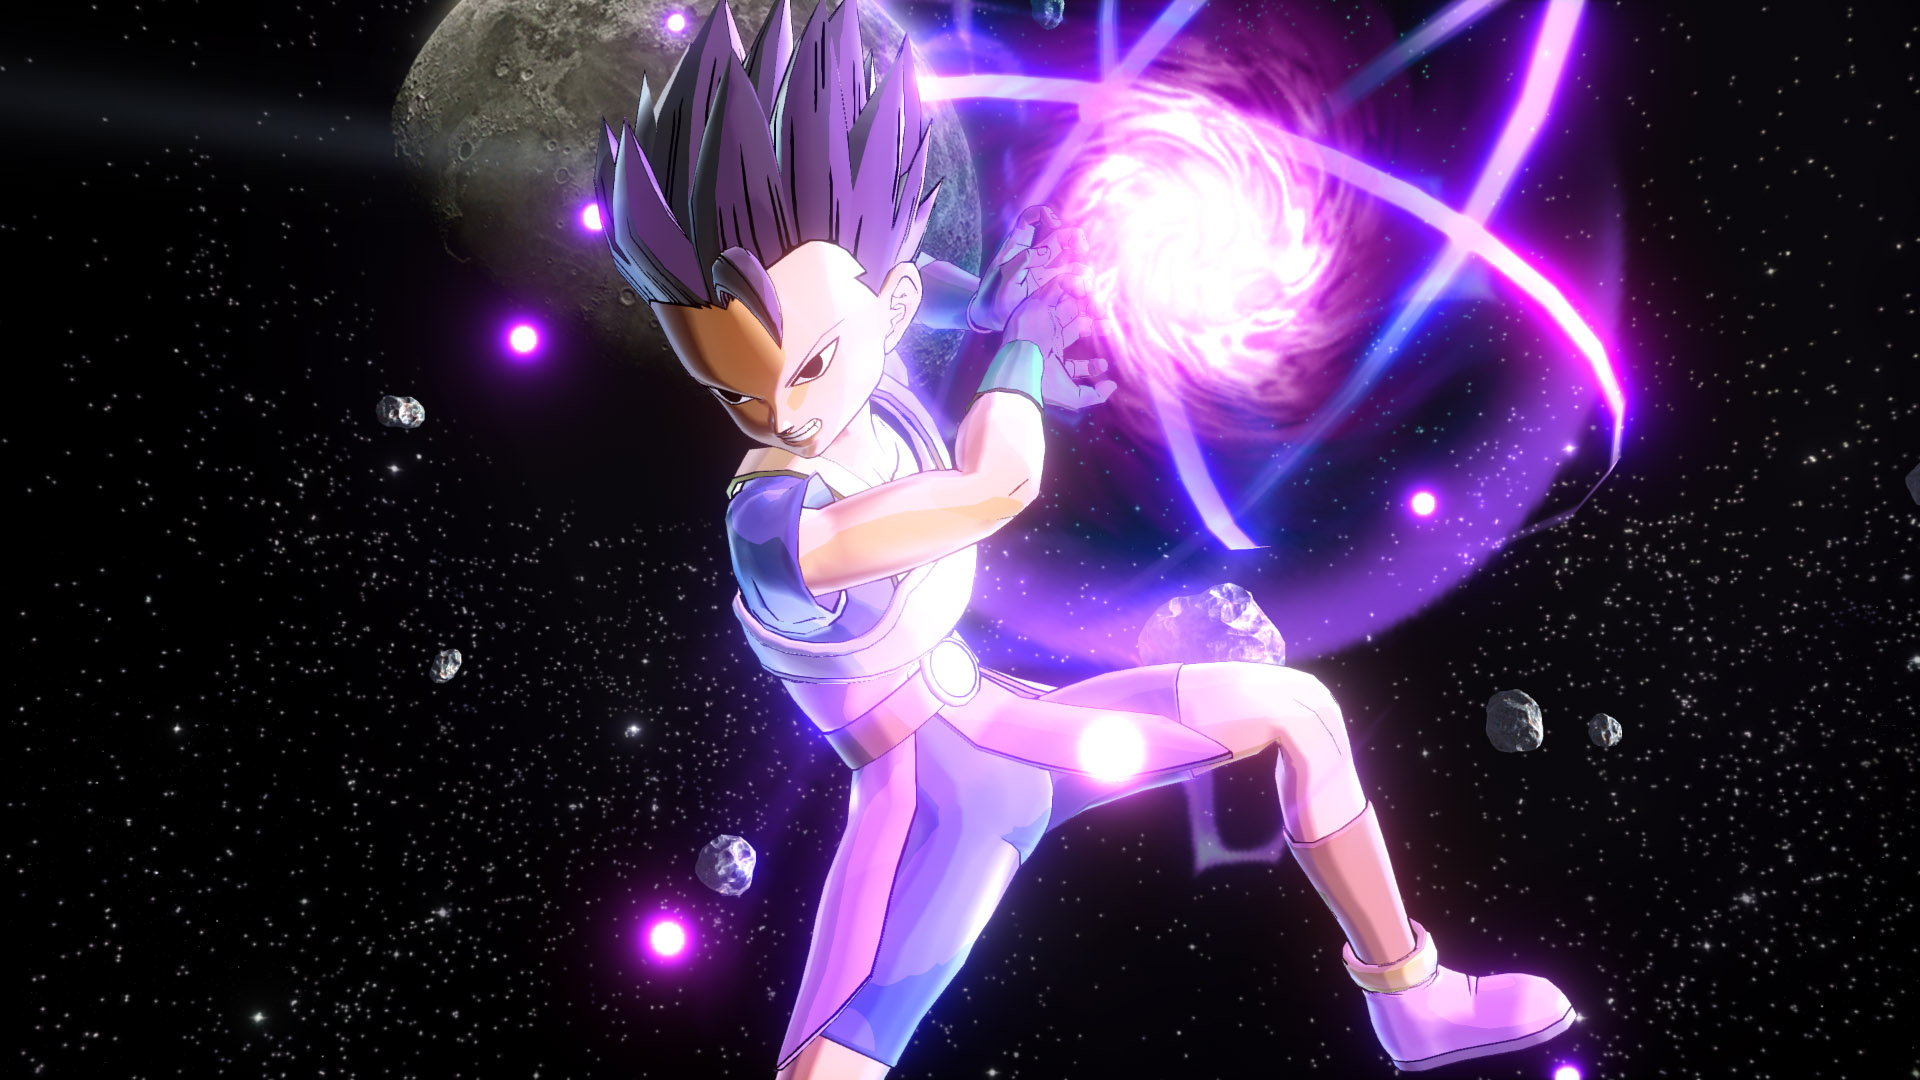 DRAGON BALL XENOVERSE 2 - Super Pack 1 on Steam